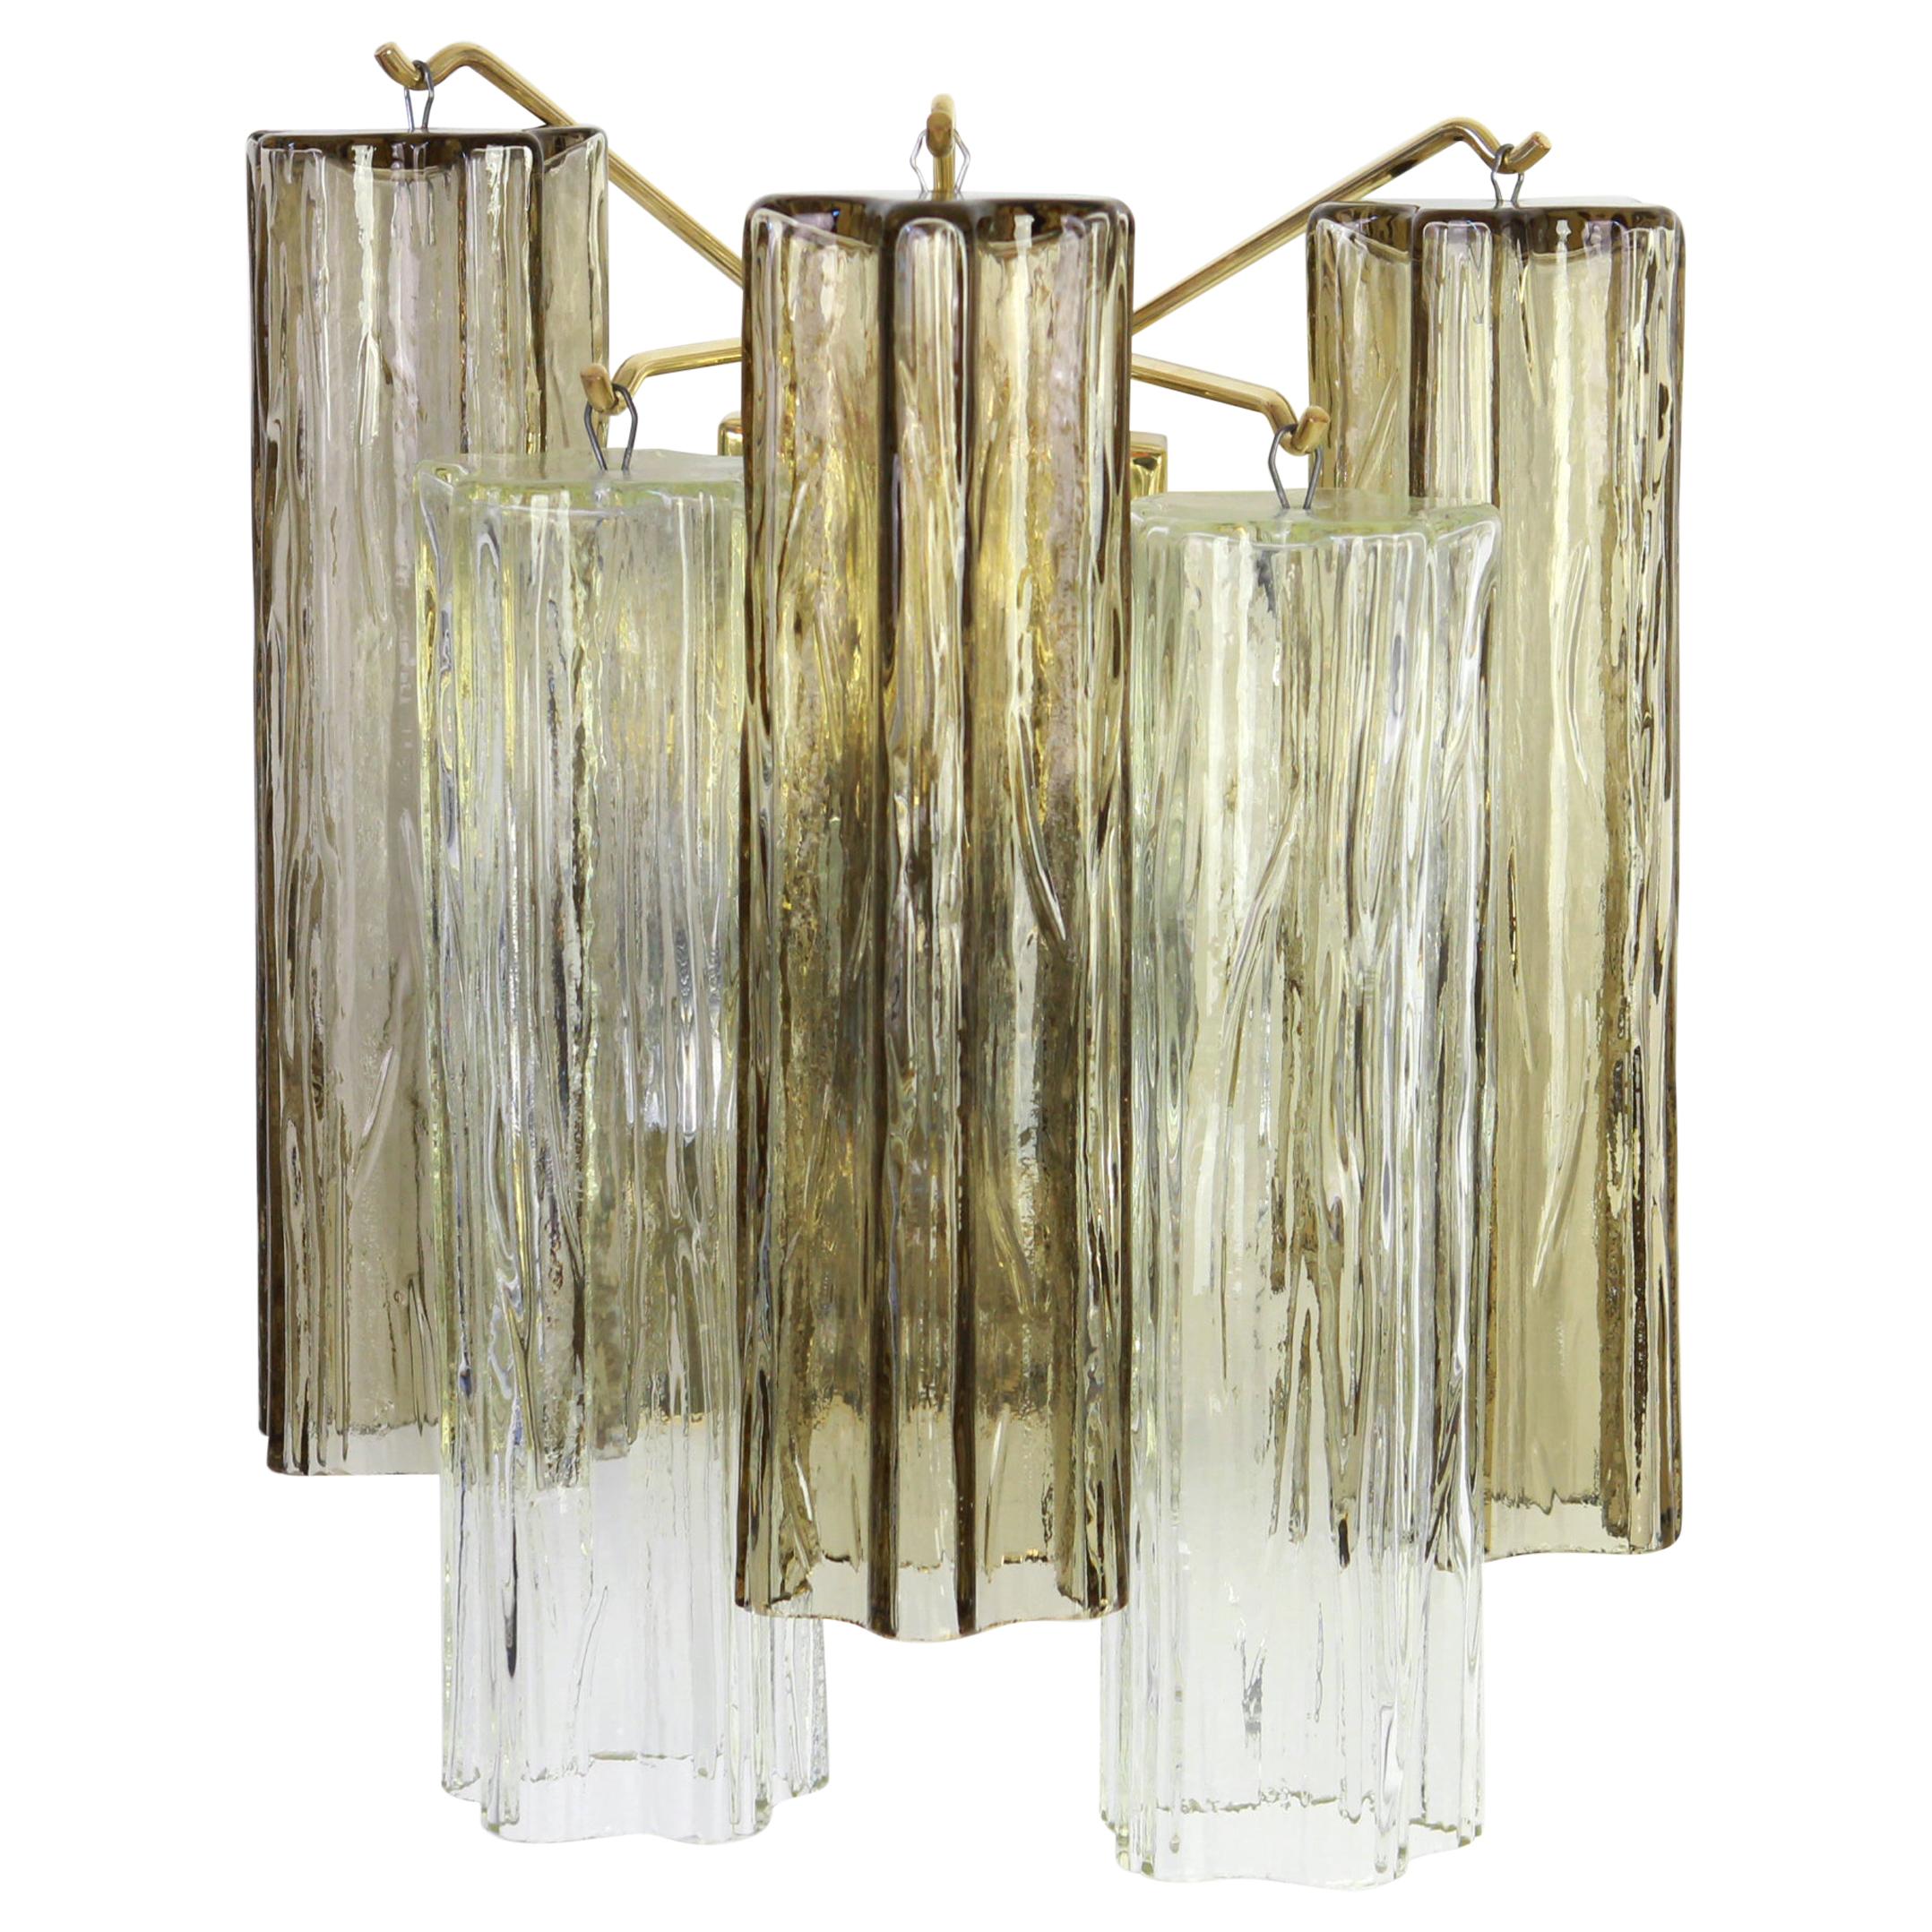 1 of 3 Pairs of Large Kalmar Sconces Wall Lights, Austria, 1960s